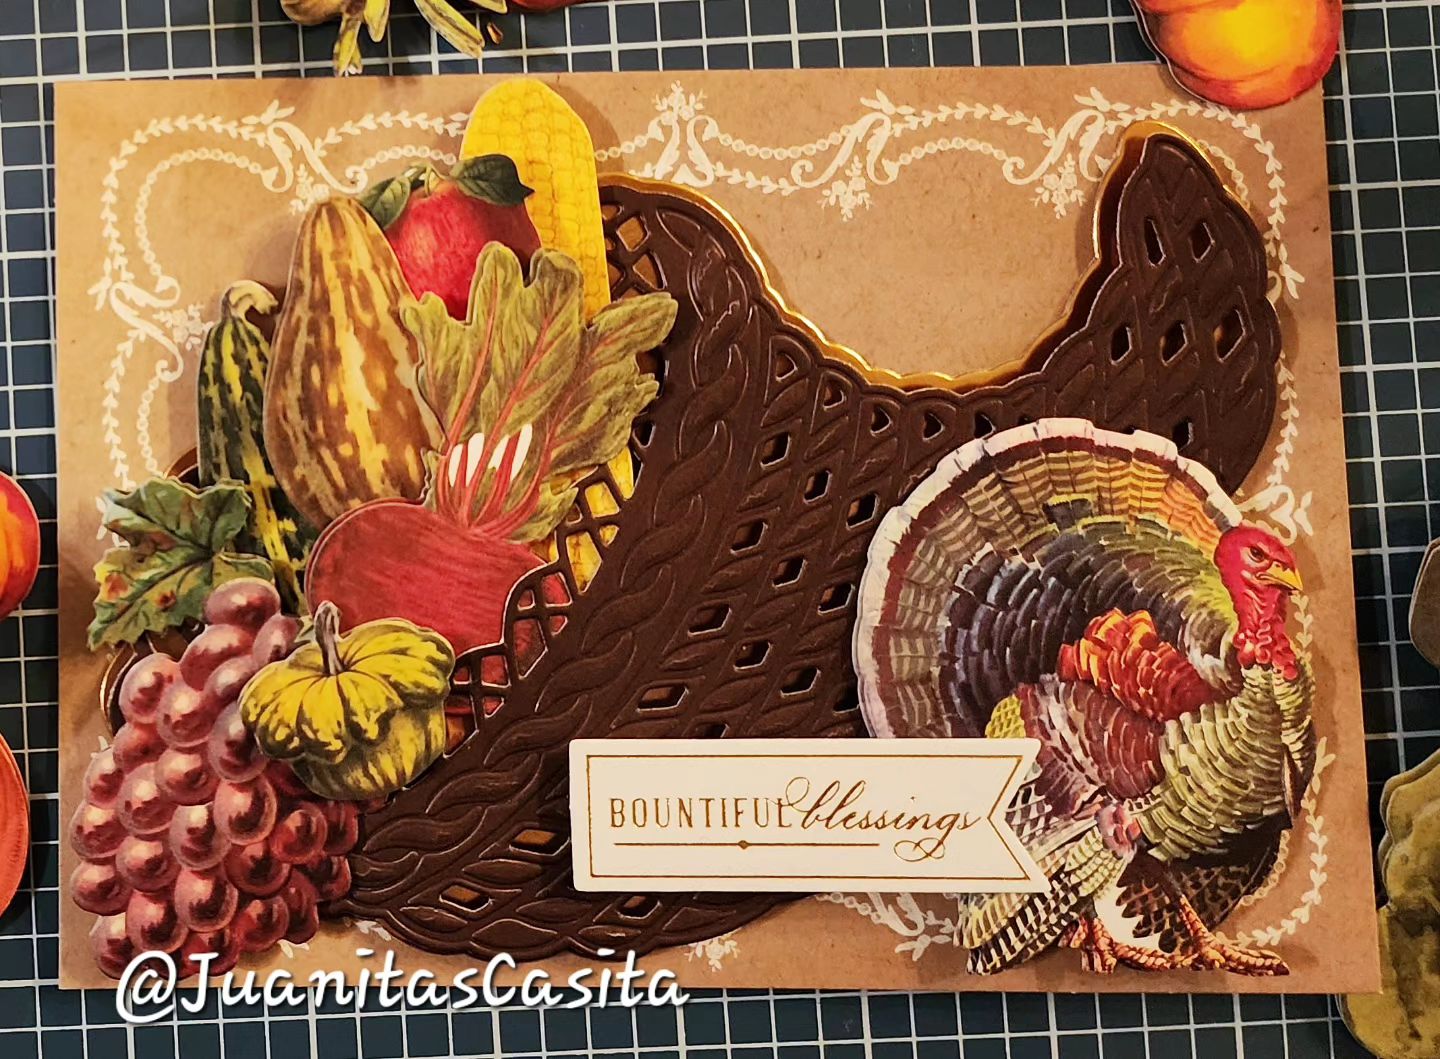 A thanksgiving card with a turkey on it.